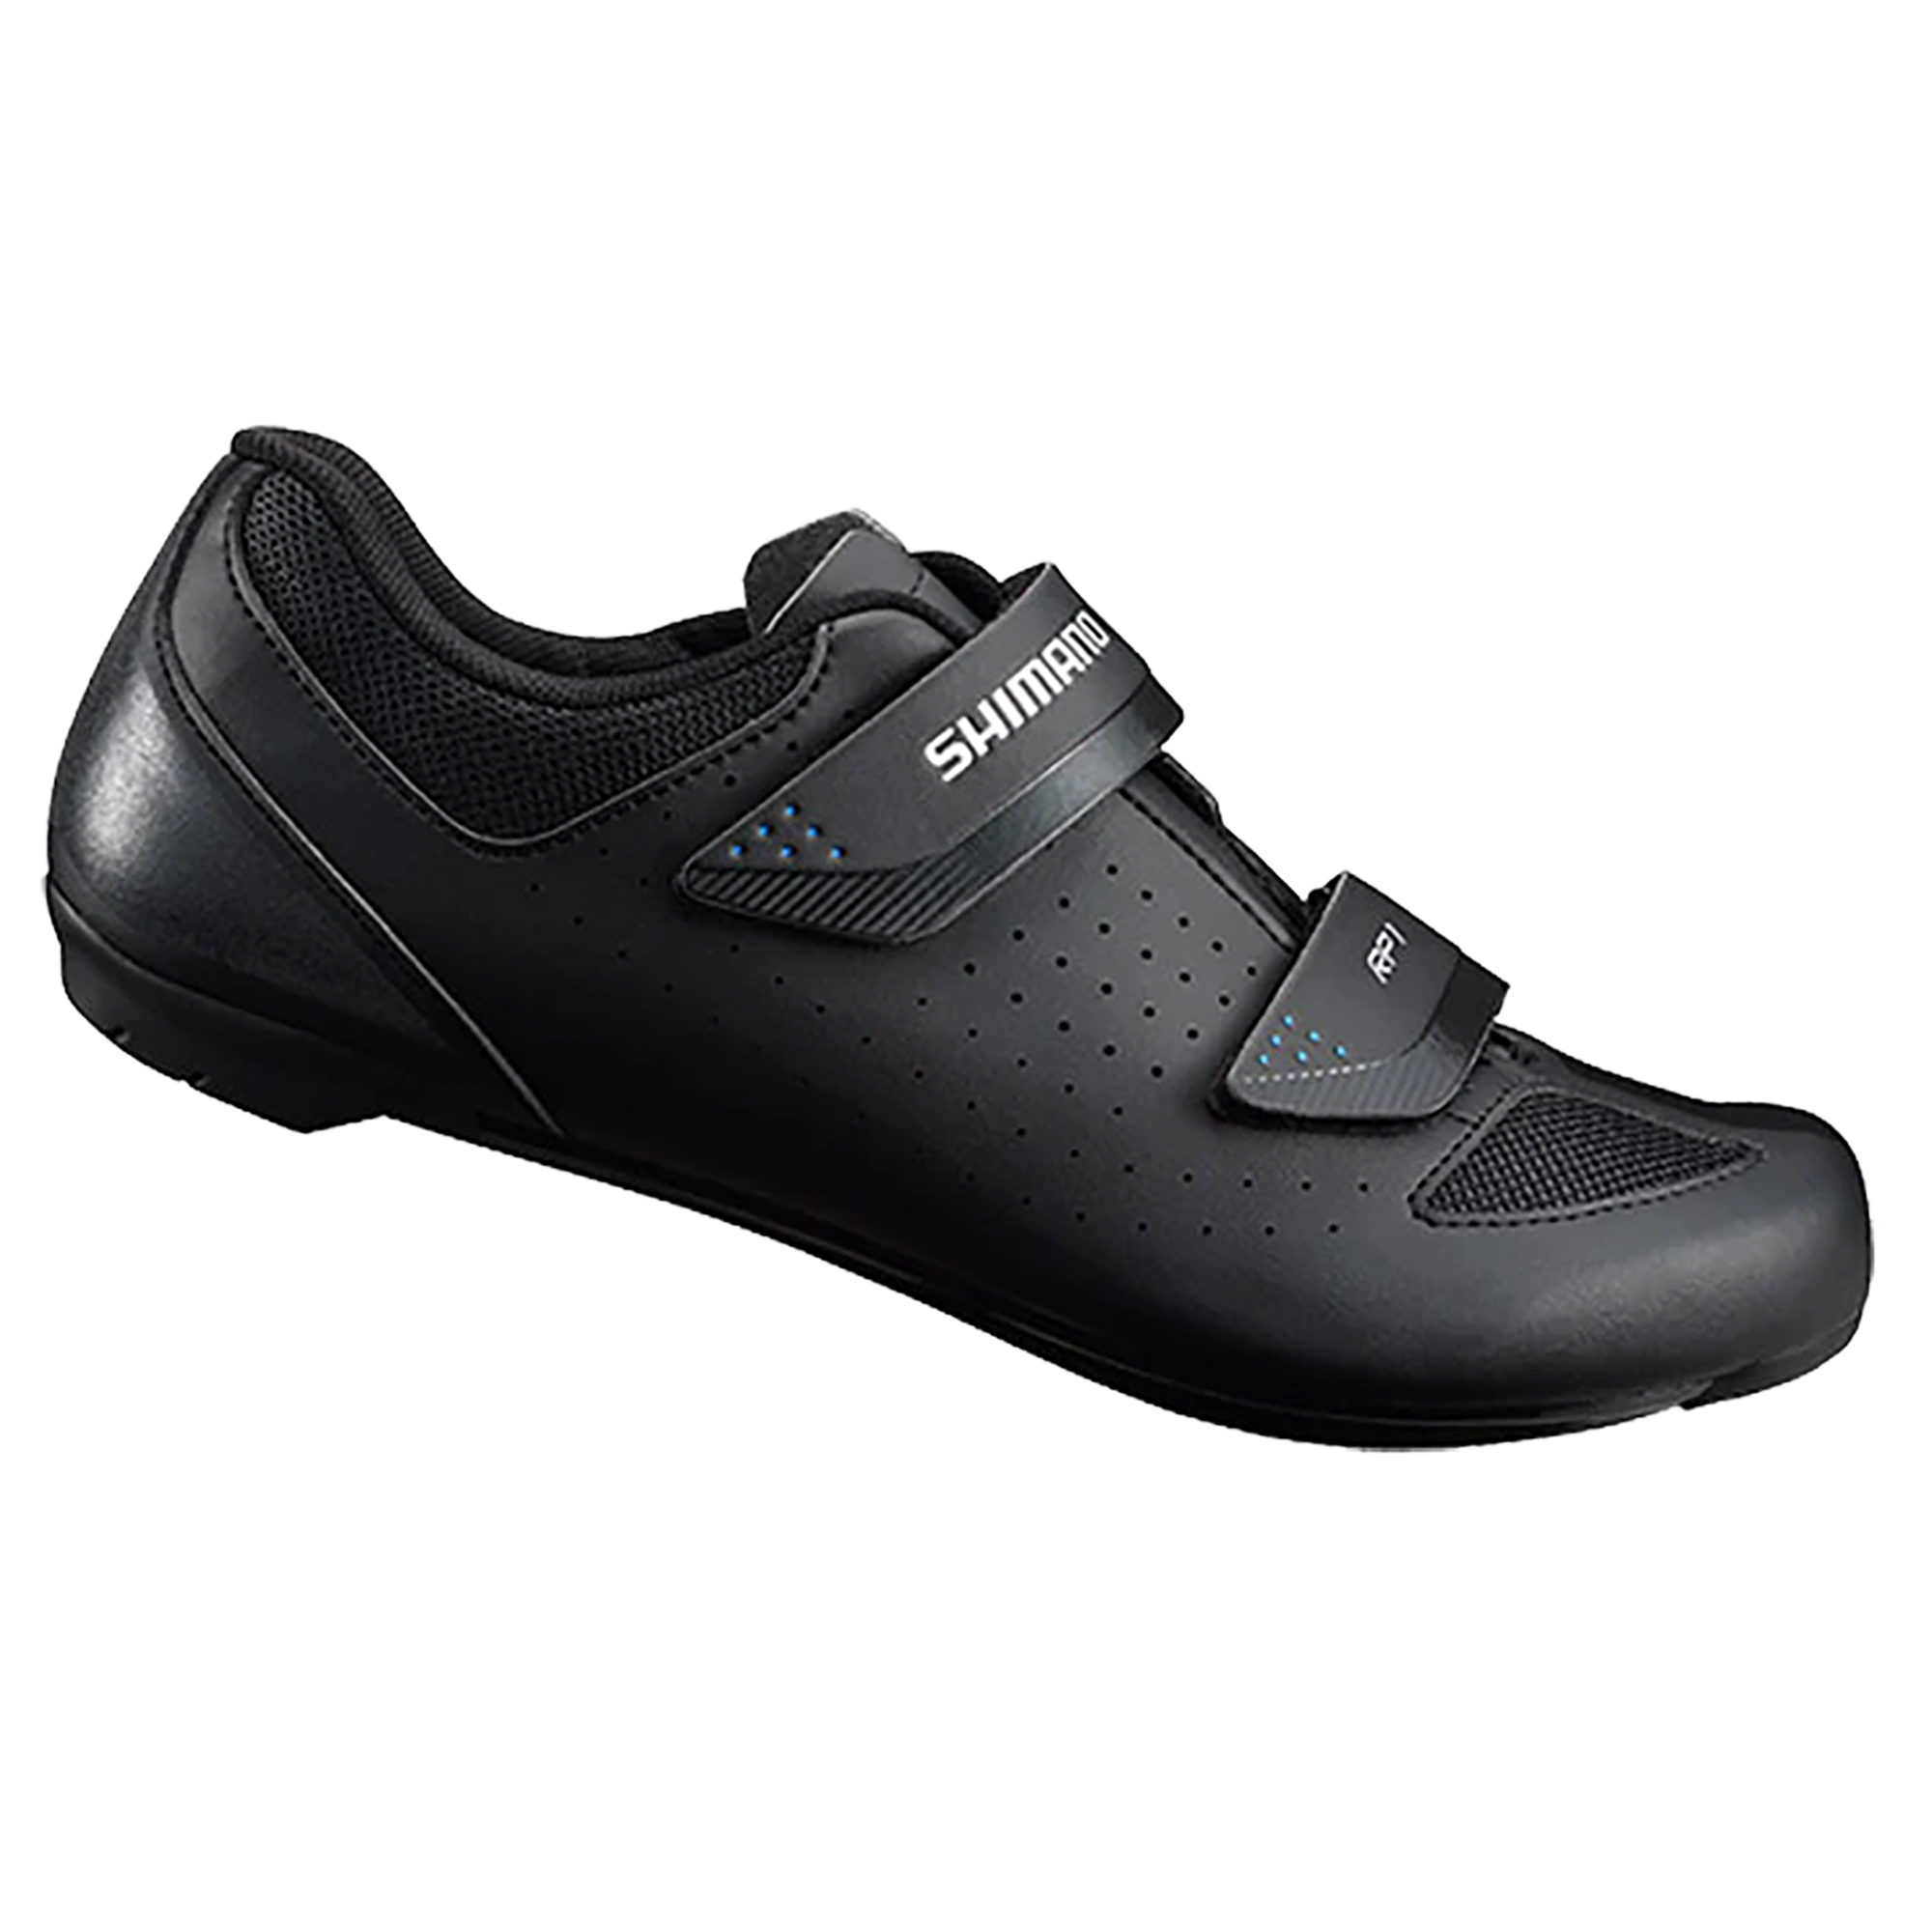 Shimano RP1 Road Bicycle Shoes For SPD SL Black Size 41